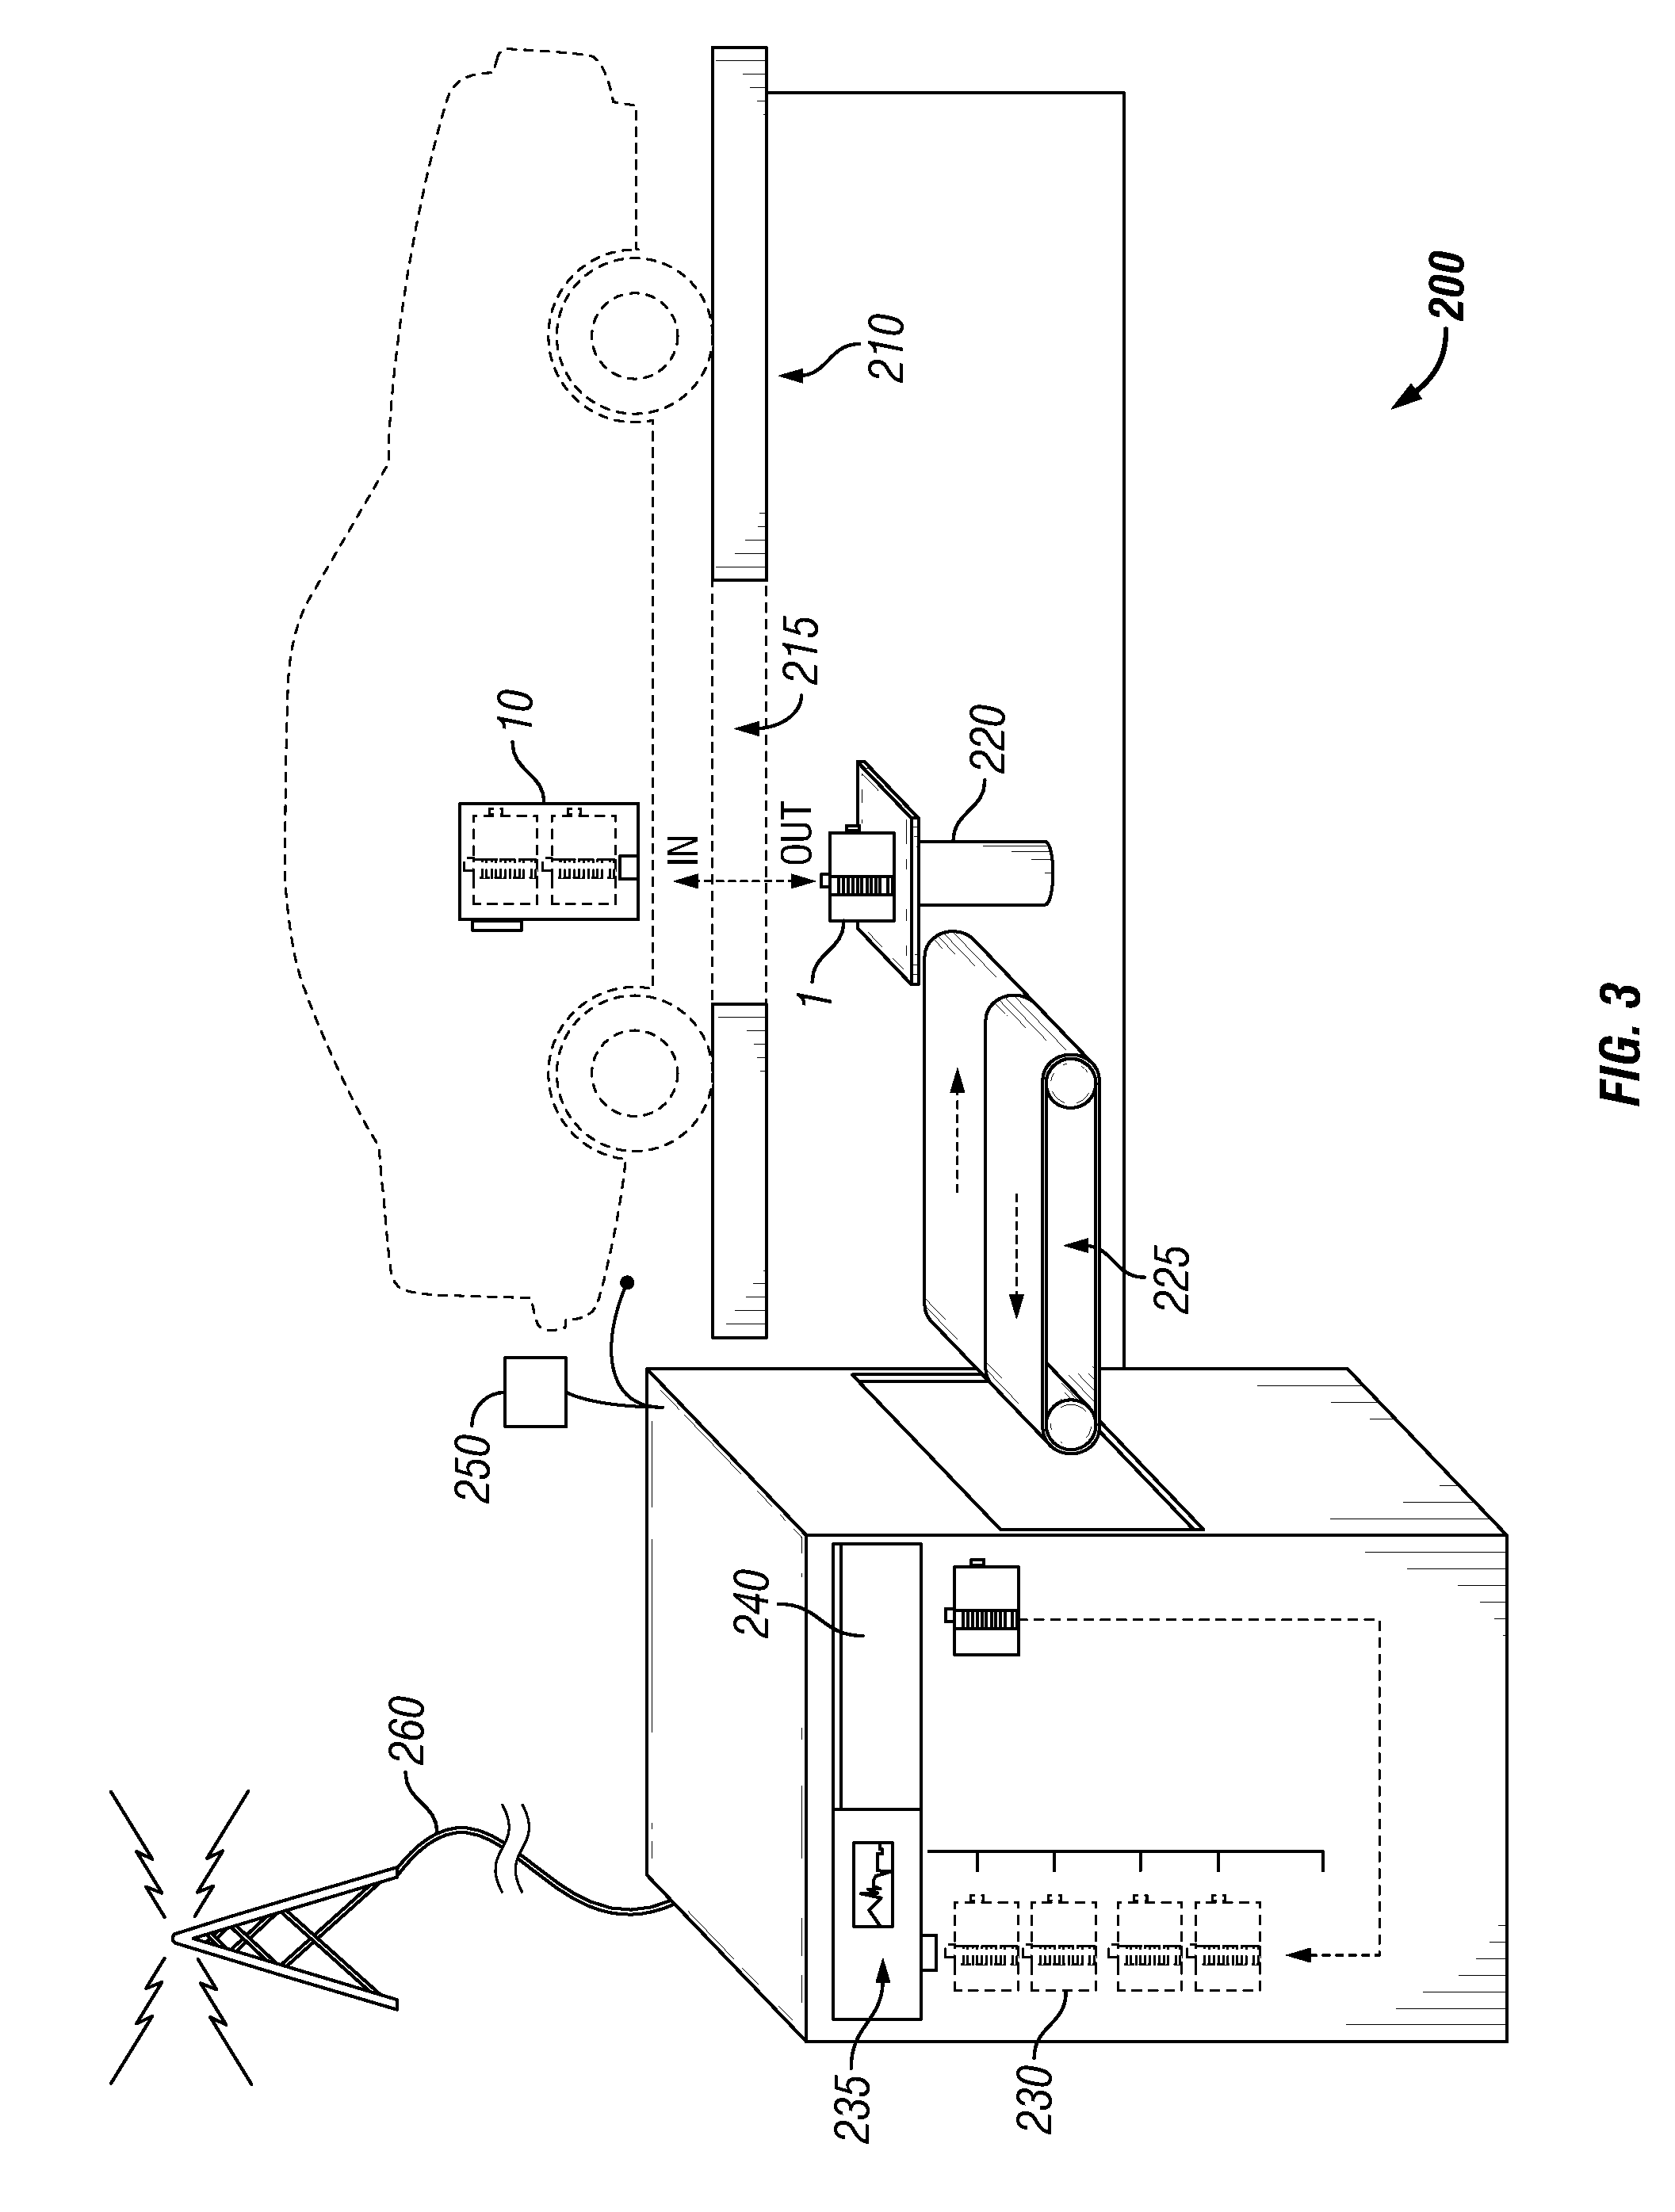 Electric vehicle battery module and replacement system